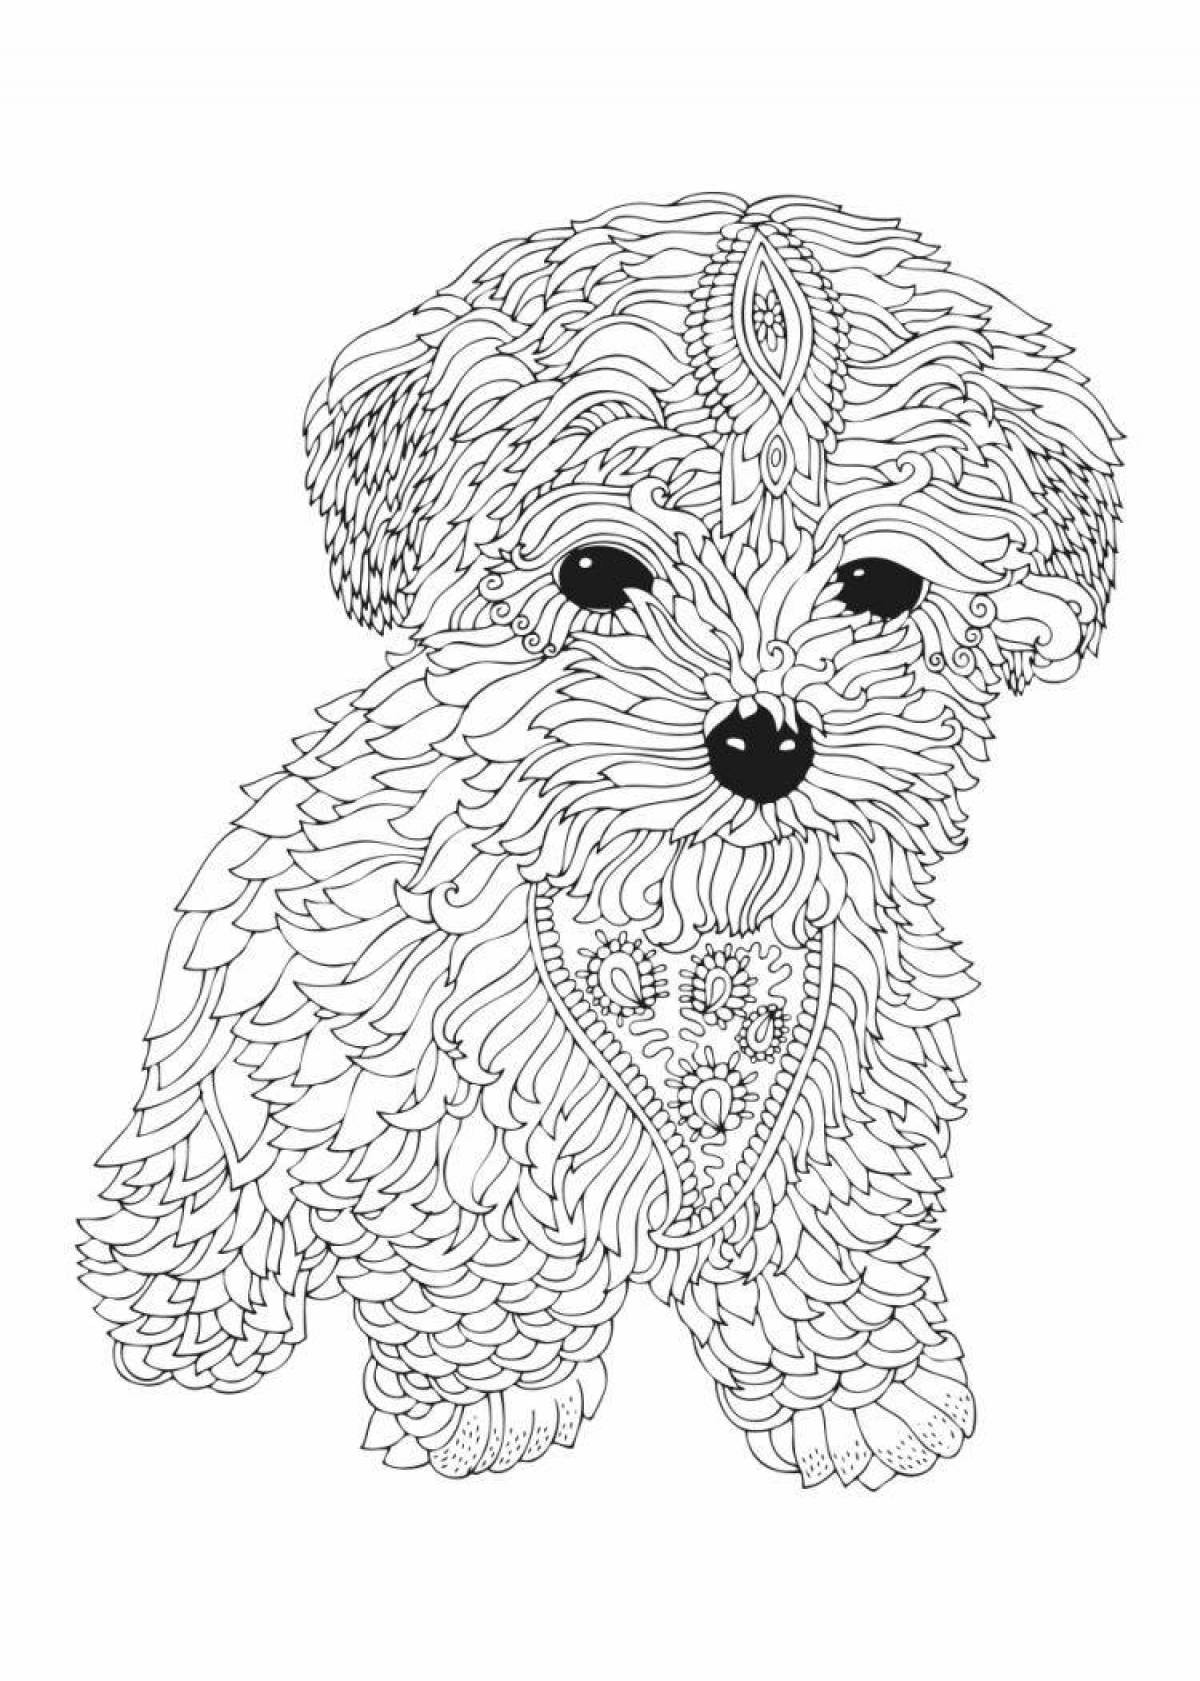 Amazing coloring pages for girls 10 years old with animals